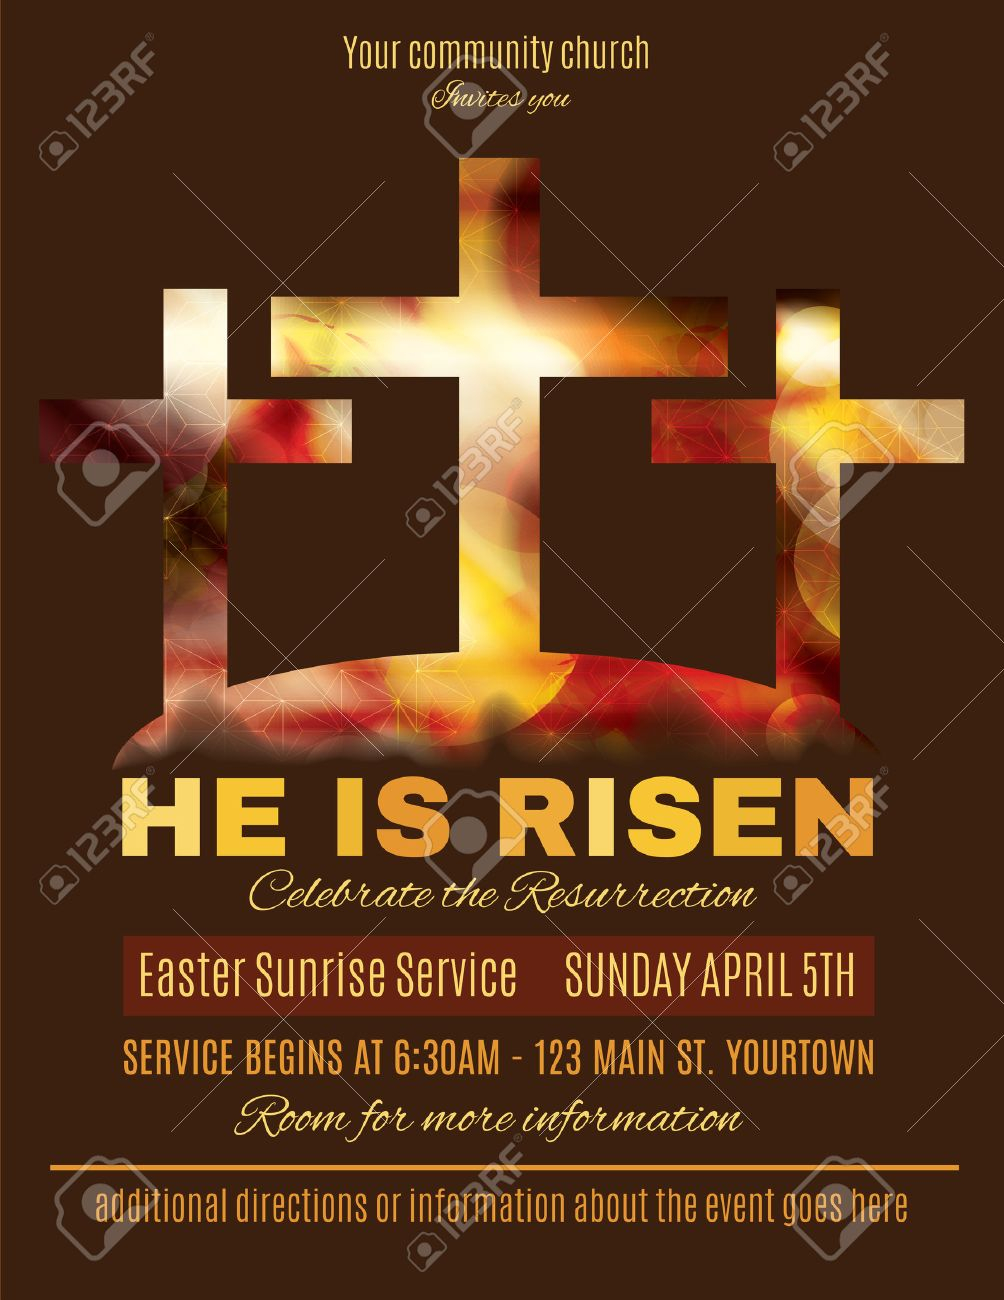 He is Risen Easter Sunrise Service Flyer template Intended For Easter Church Flyer Template Throughout Easter Church Flyer Template